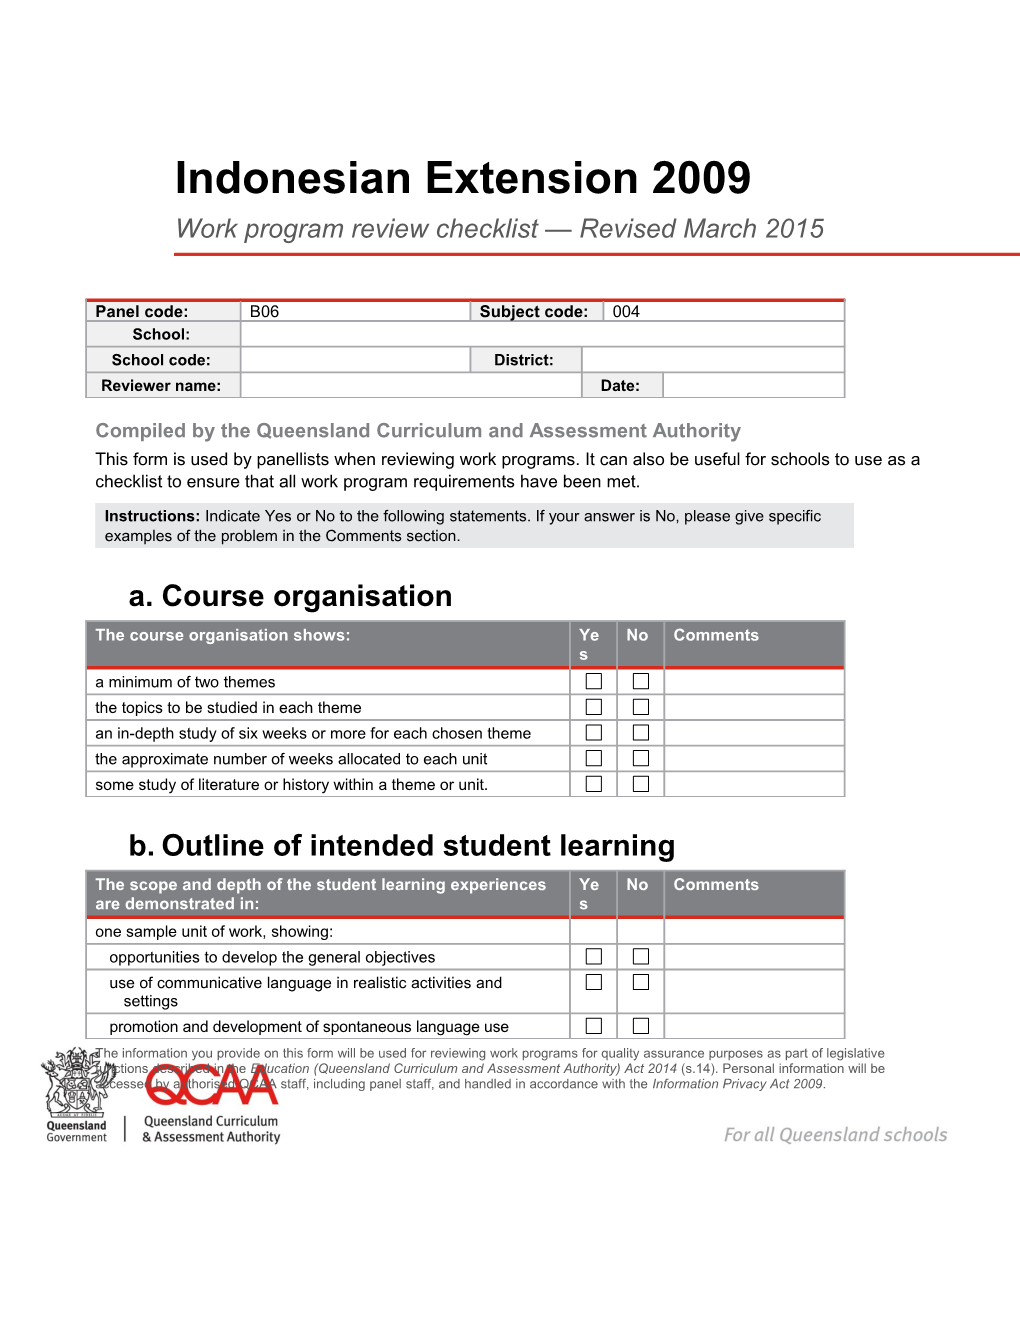 Indonesian Extension (2009) Work Program Review Checklist